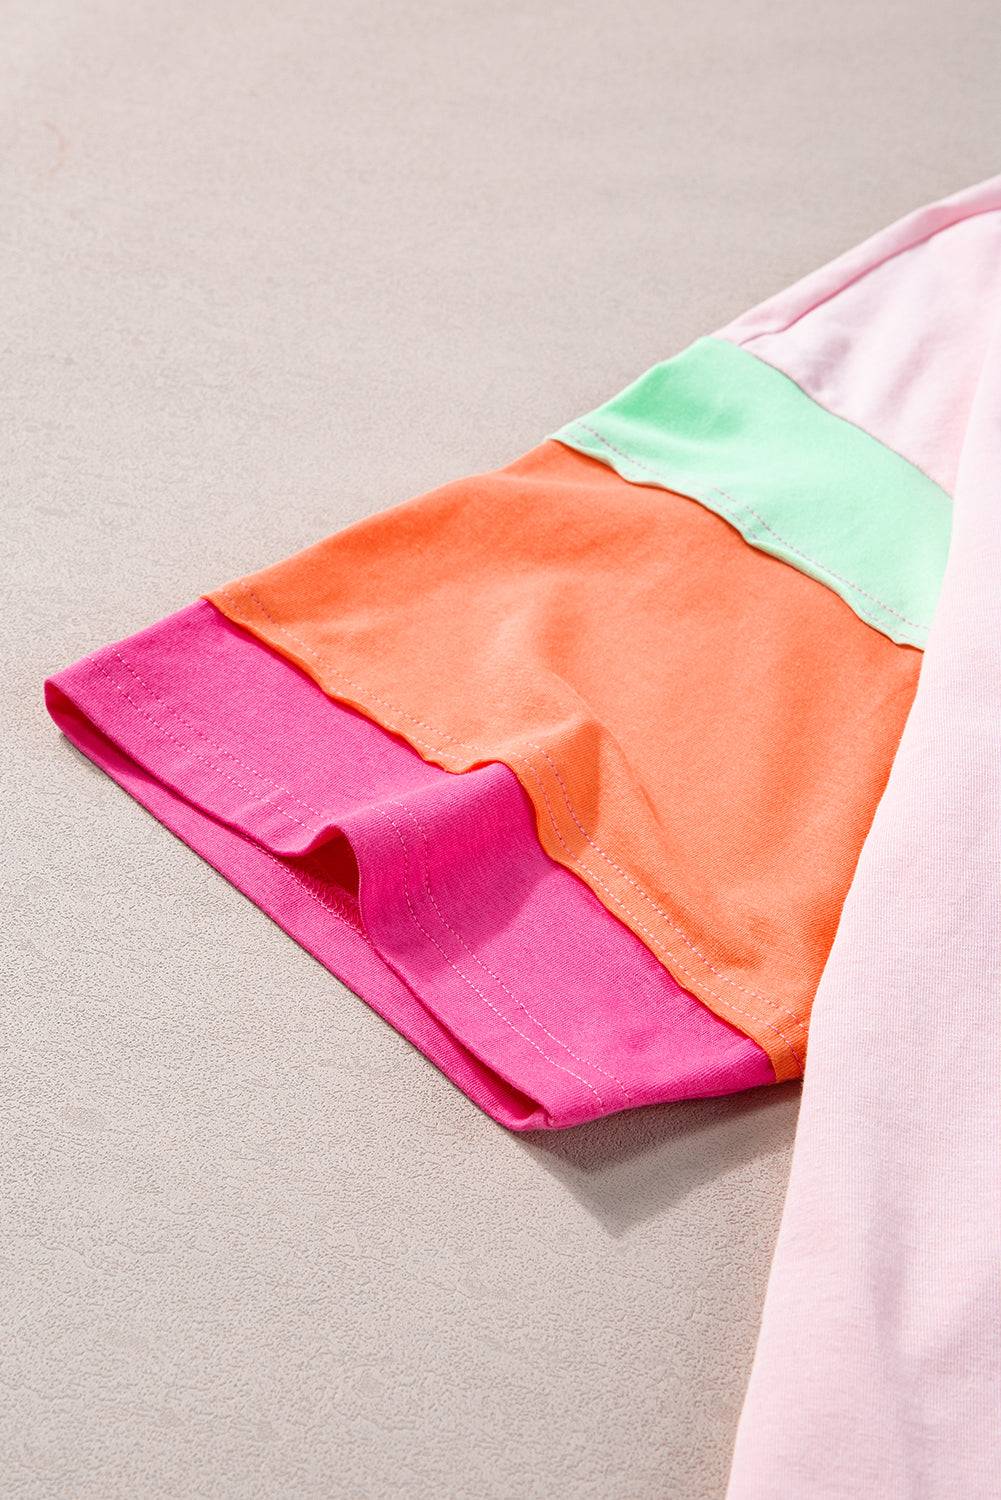 a pink, orange, and green shirt laying on the ground